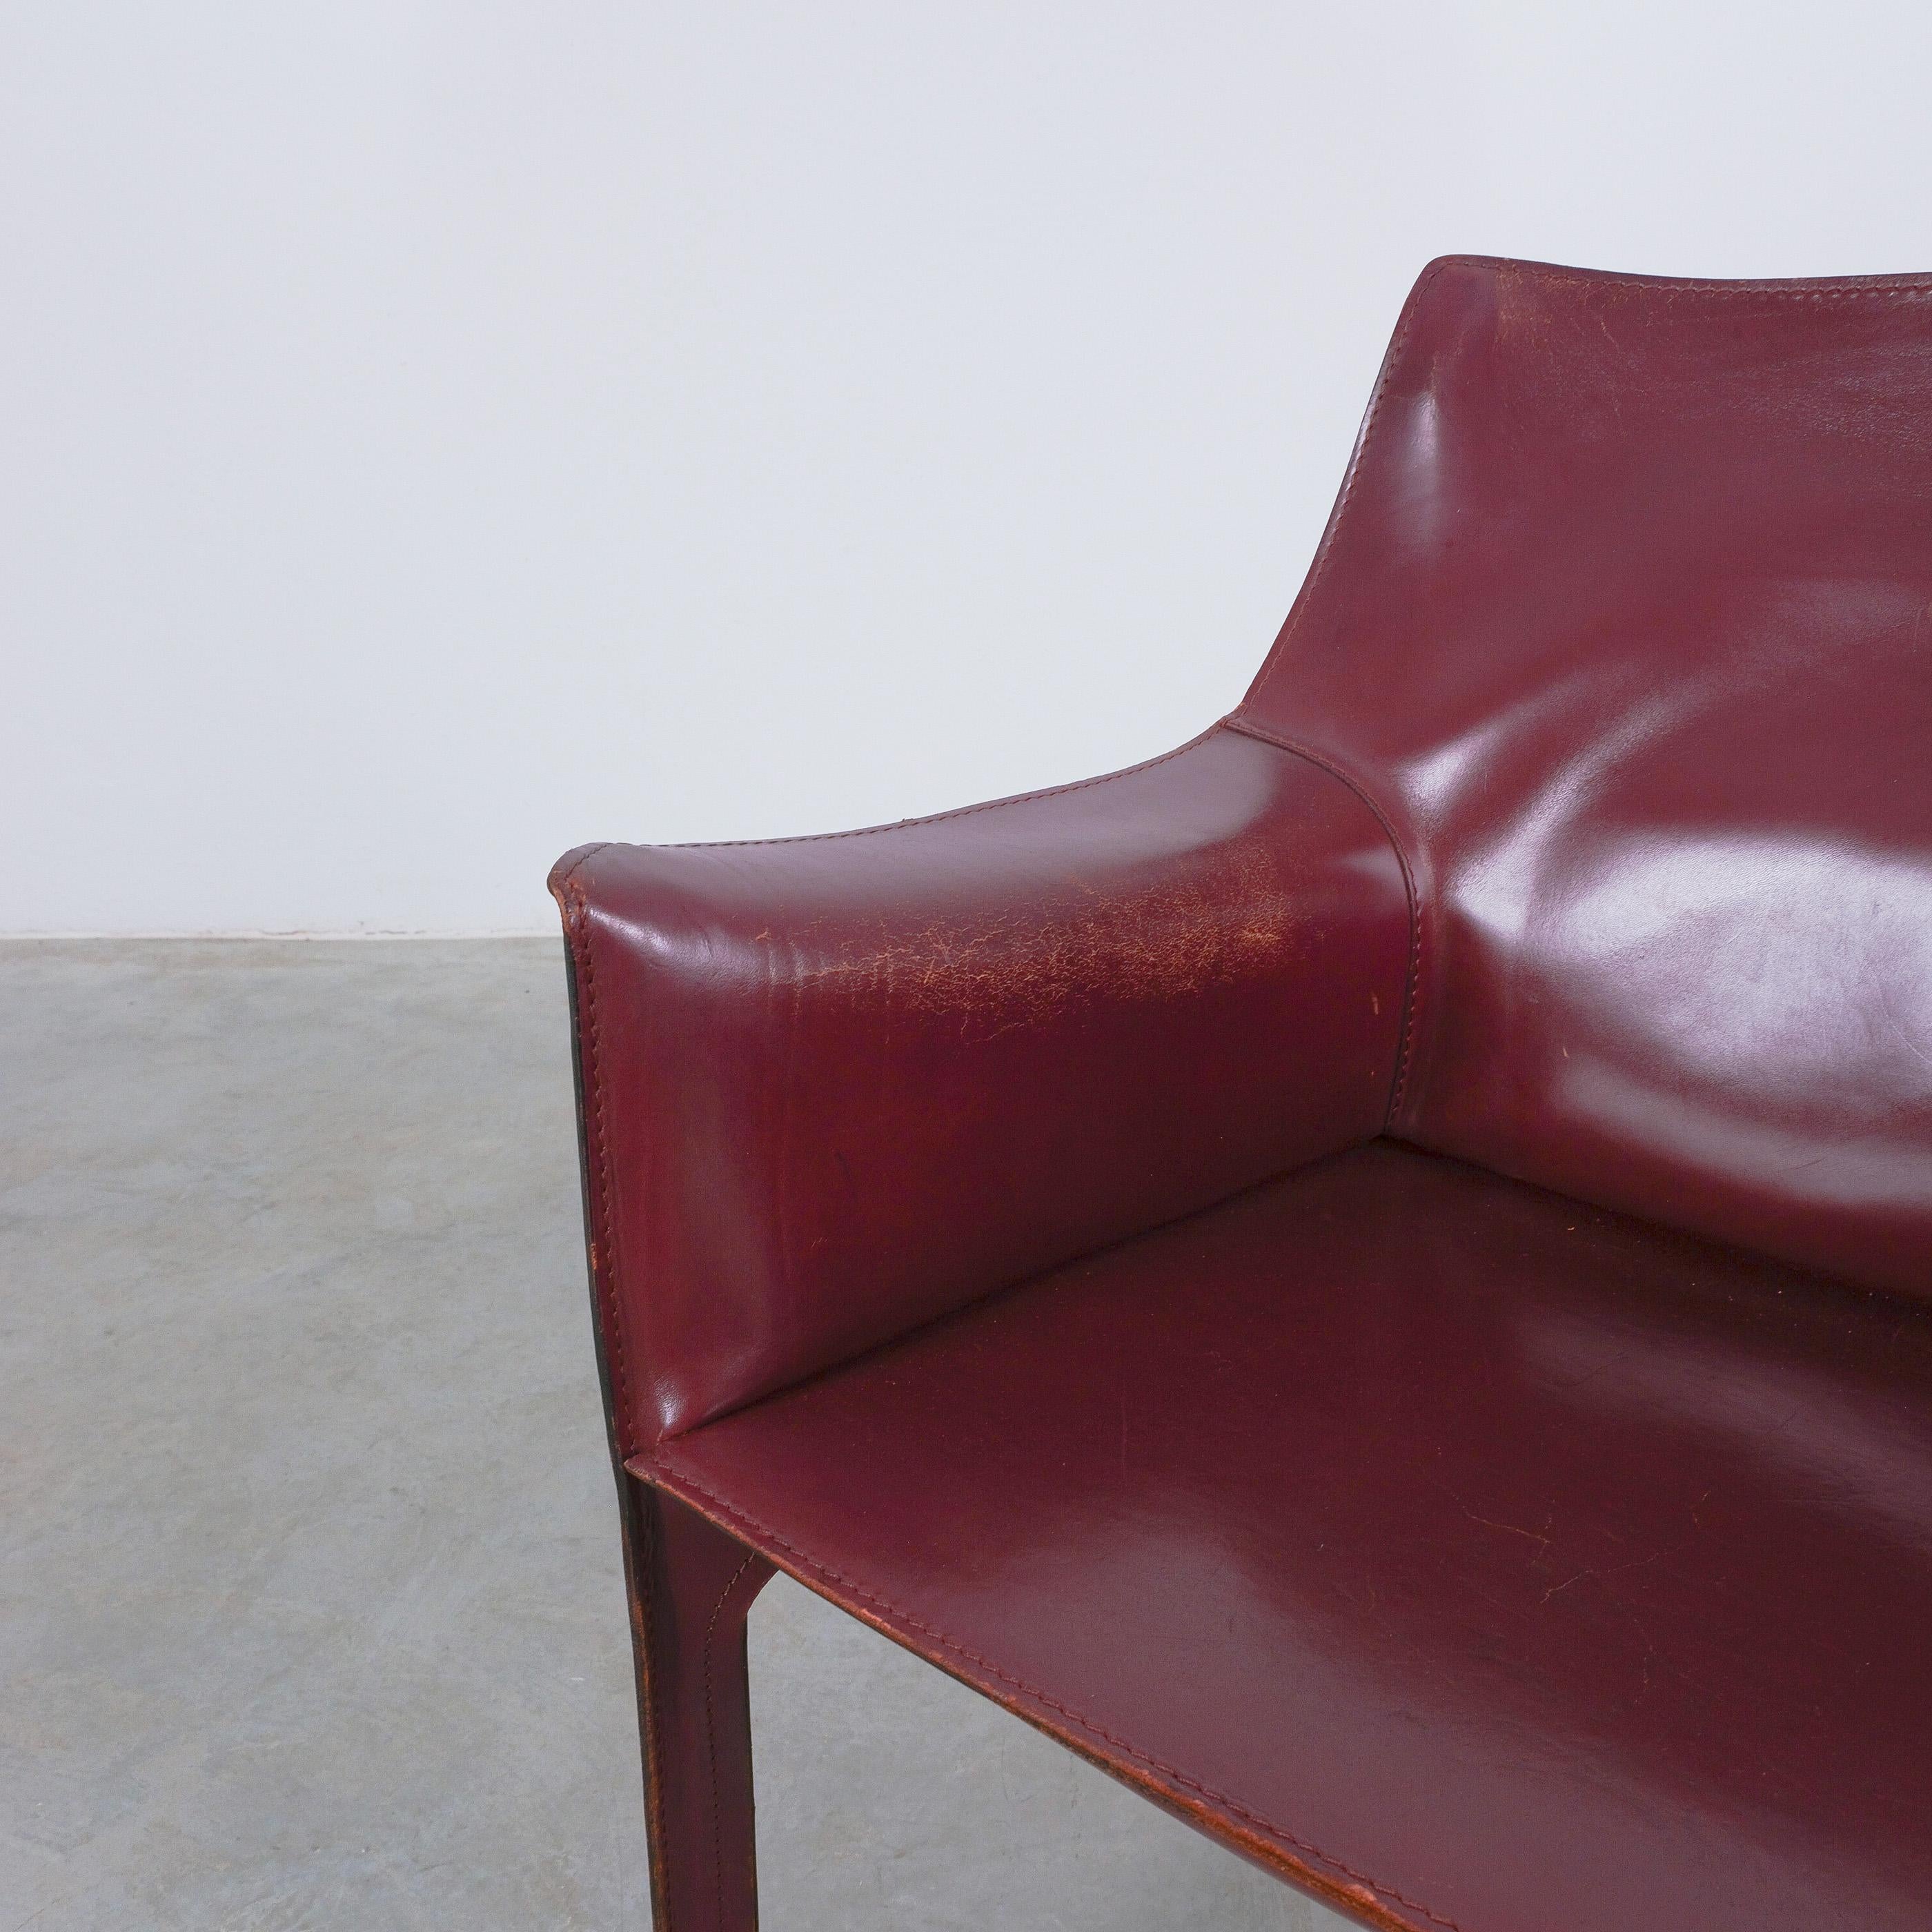 Mario Bellini Cassina Cab 413 Burgundy Red Leather Dining Chairs, 1980 For Sale 5